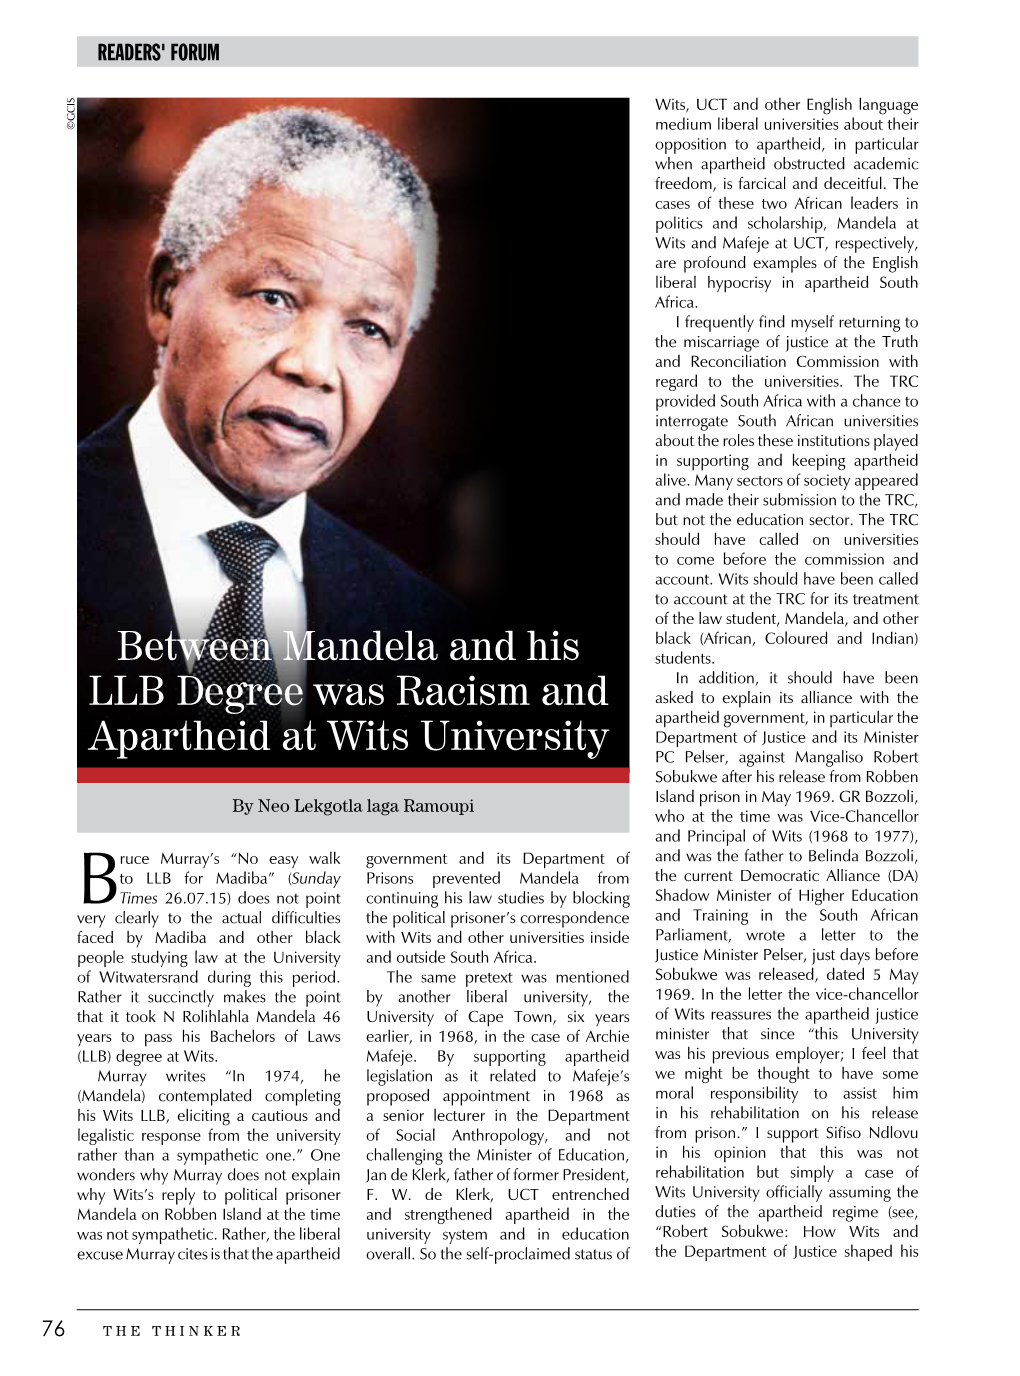 Between Mandela and His LLB Degree Was Racism and Apartheid